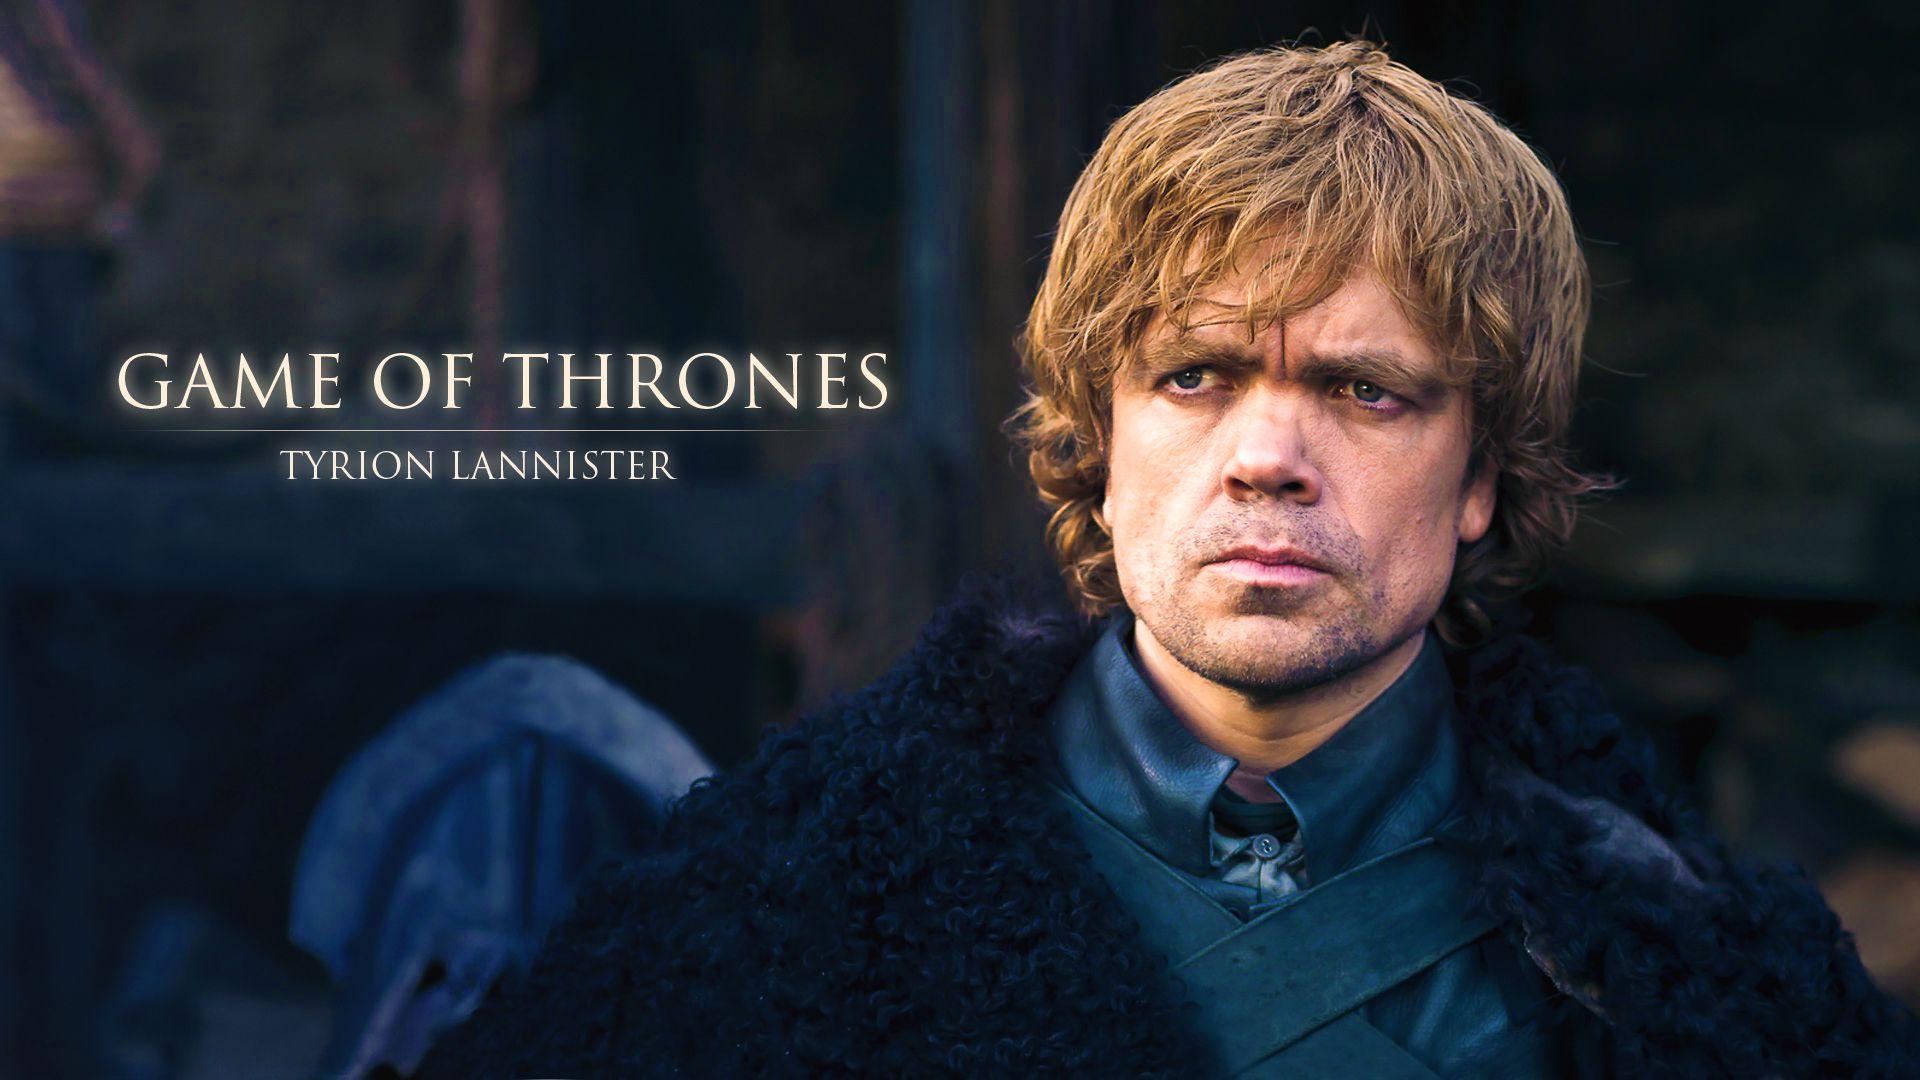 Tyrion Lannister 1920 x 1080